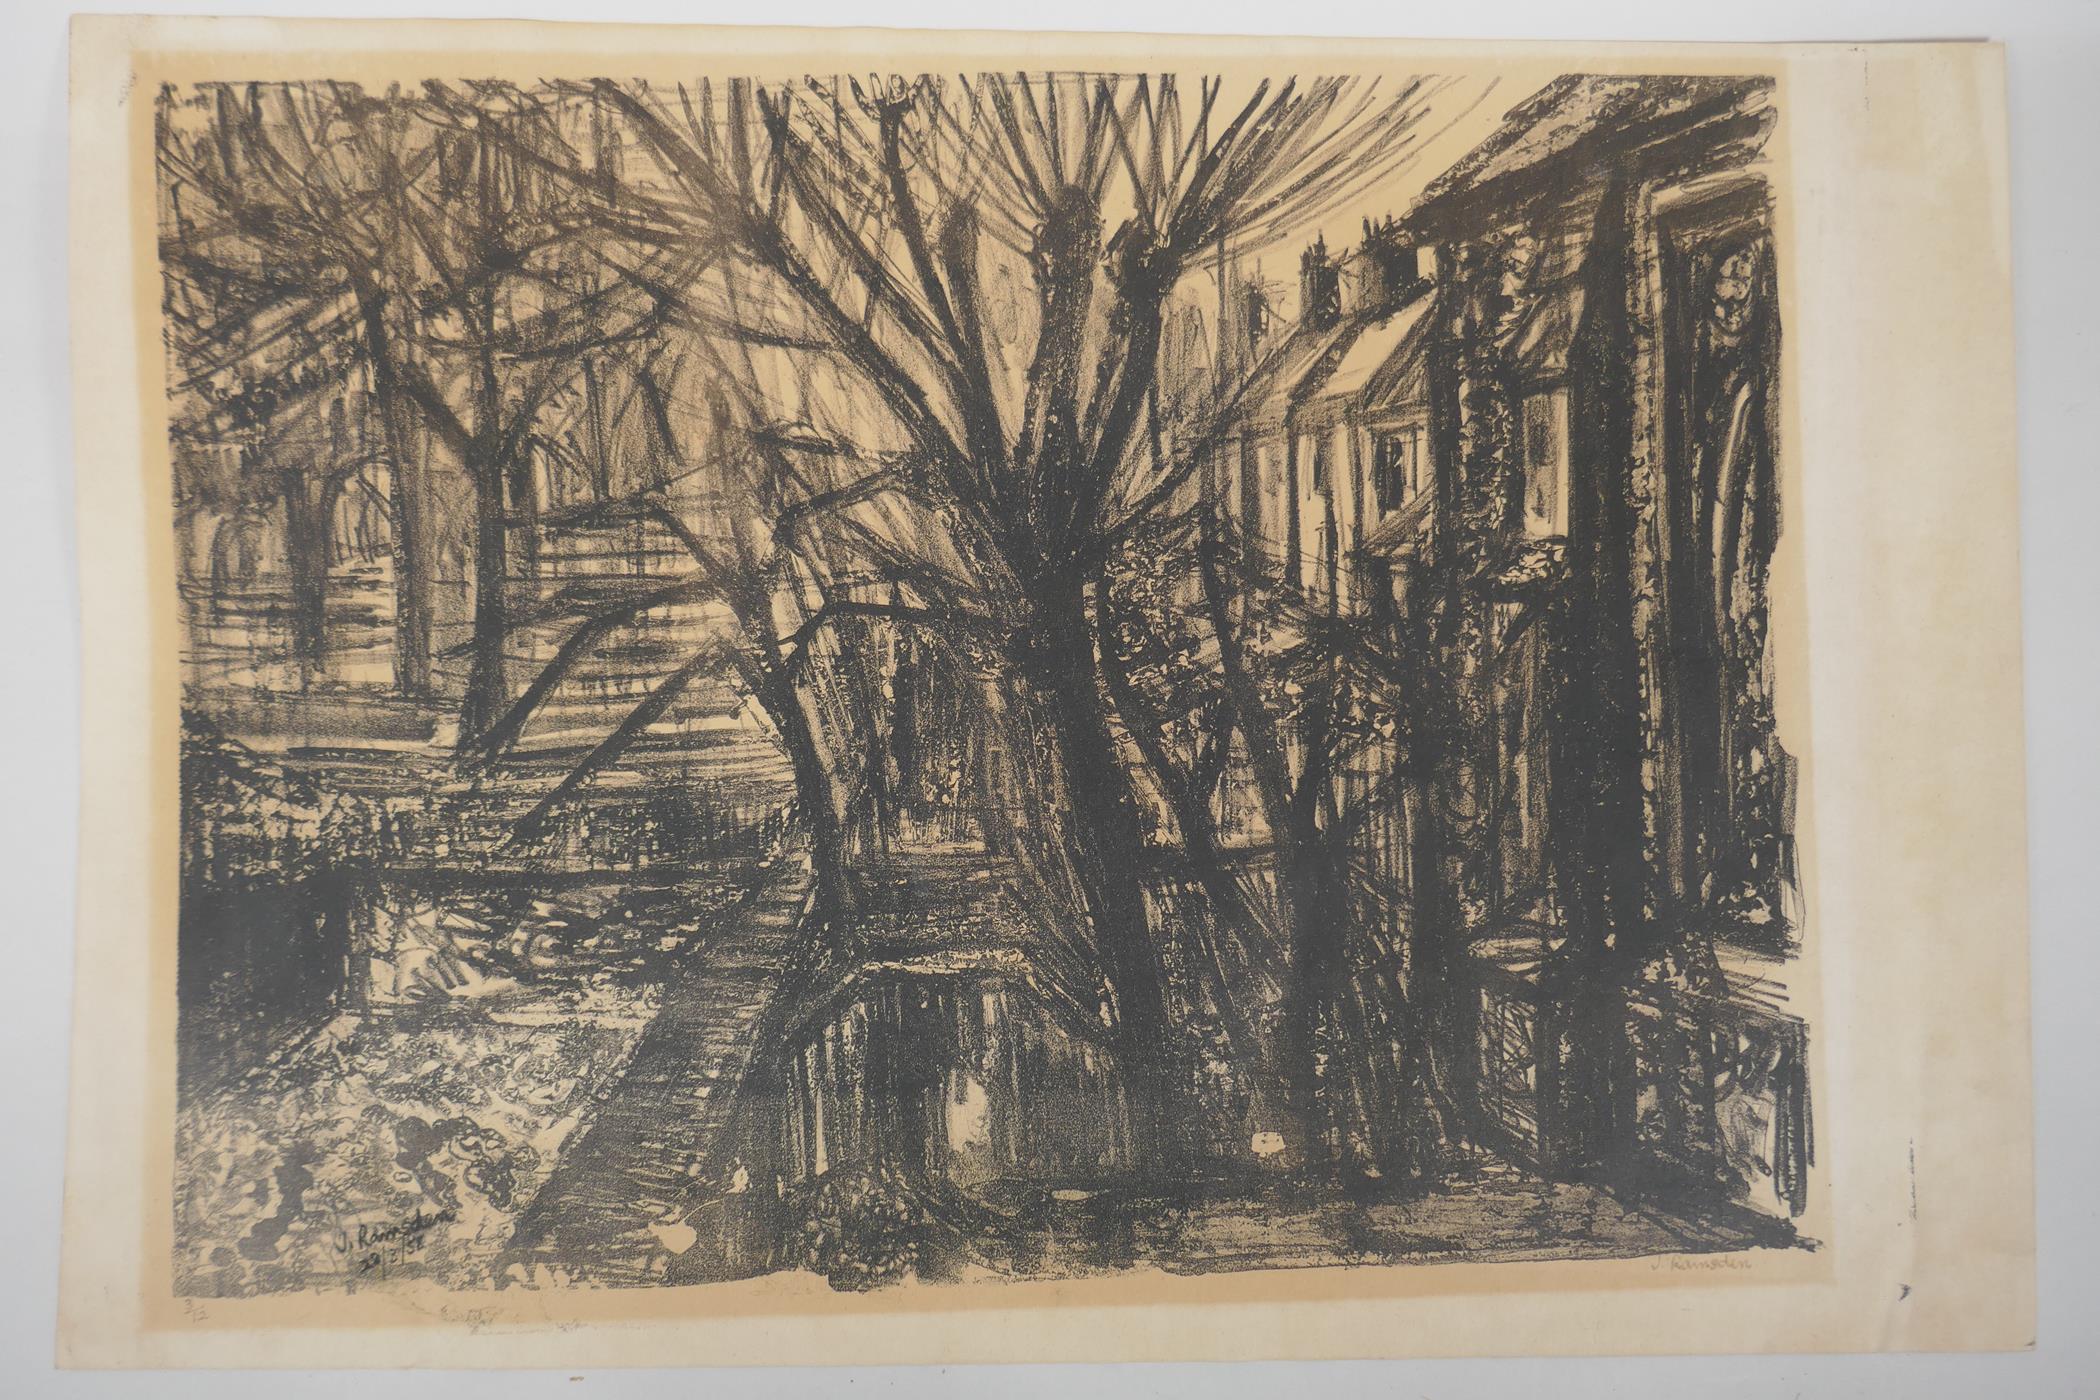 'Fettes', signed Edwin Ladell, and a wooded path by dwellings, signed J. Ramsden, both unframed - Image 6 of 8